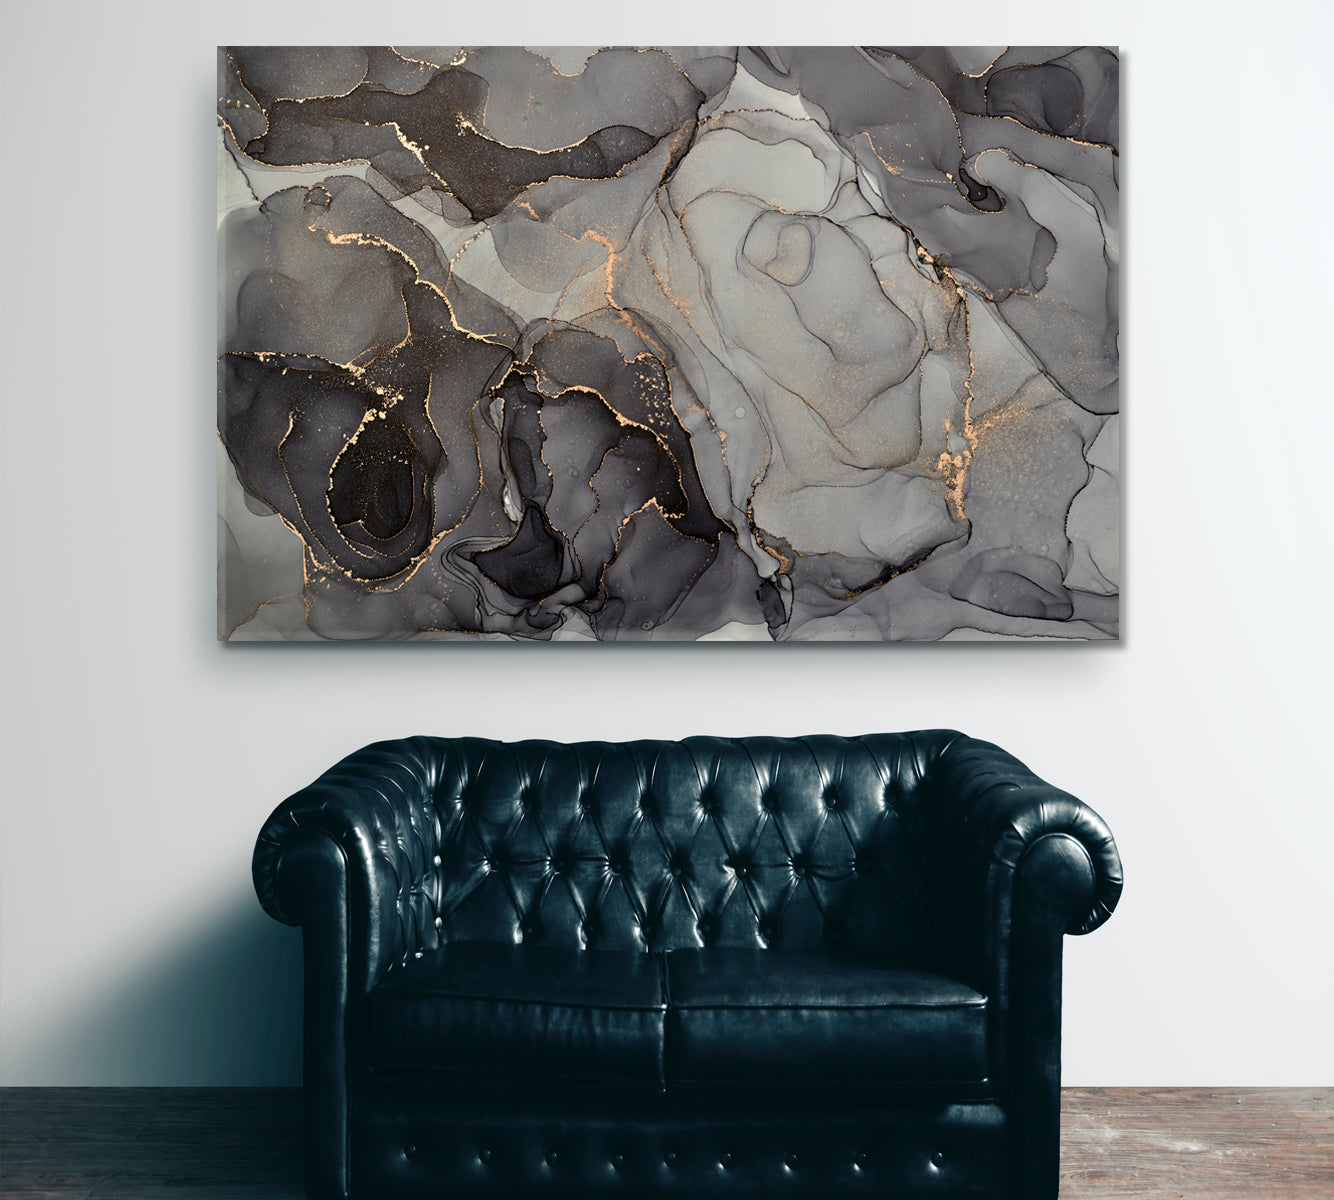 Black Gray Marble Alcohol Ink Stains Translucent Waves Fluid Art, Oriental Marbling Canvas Print Artesty 1 panel 24" x 16" 